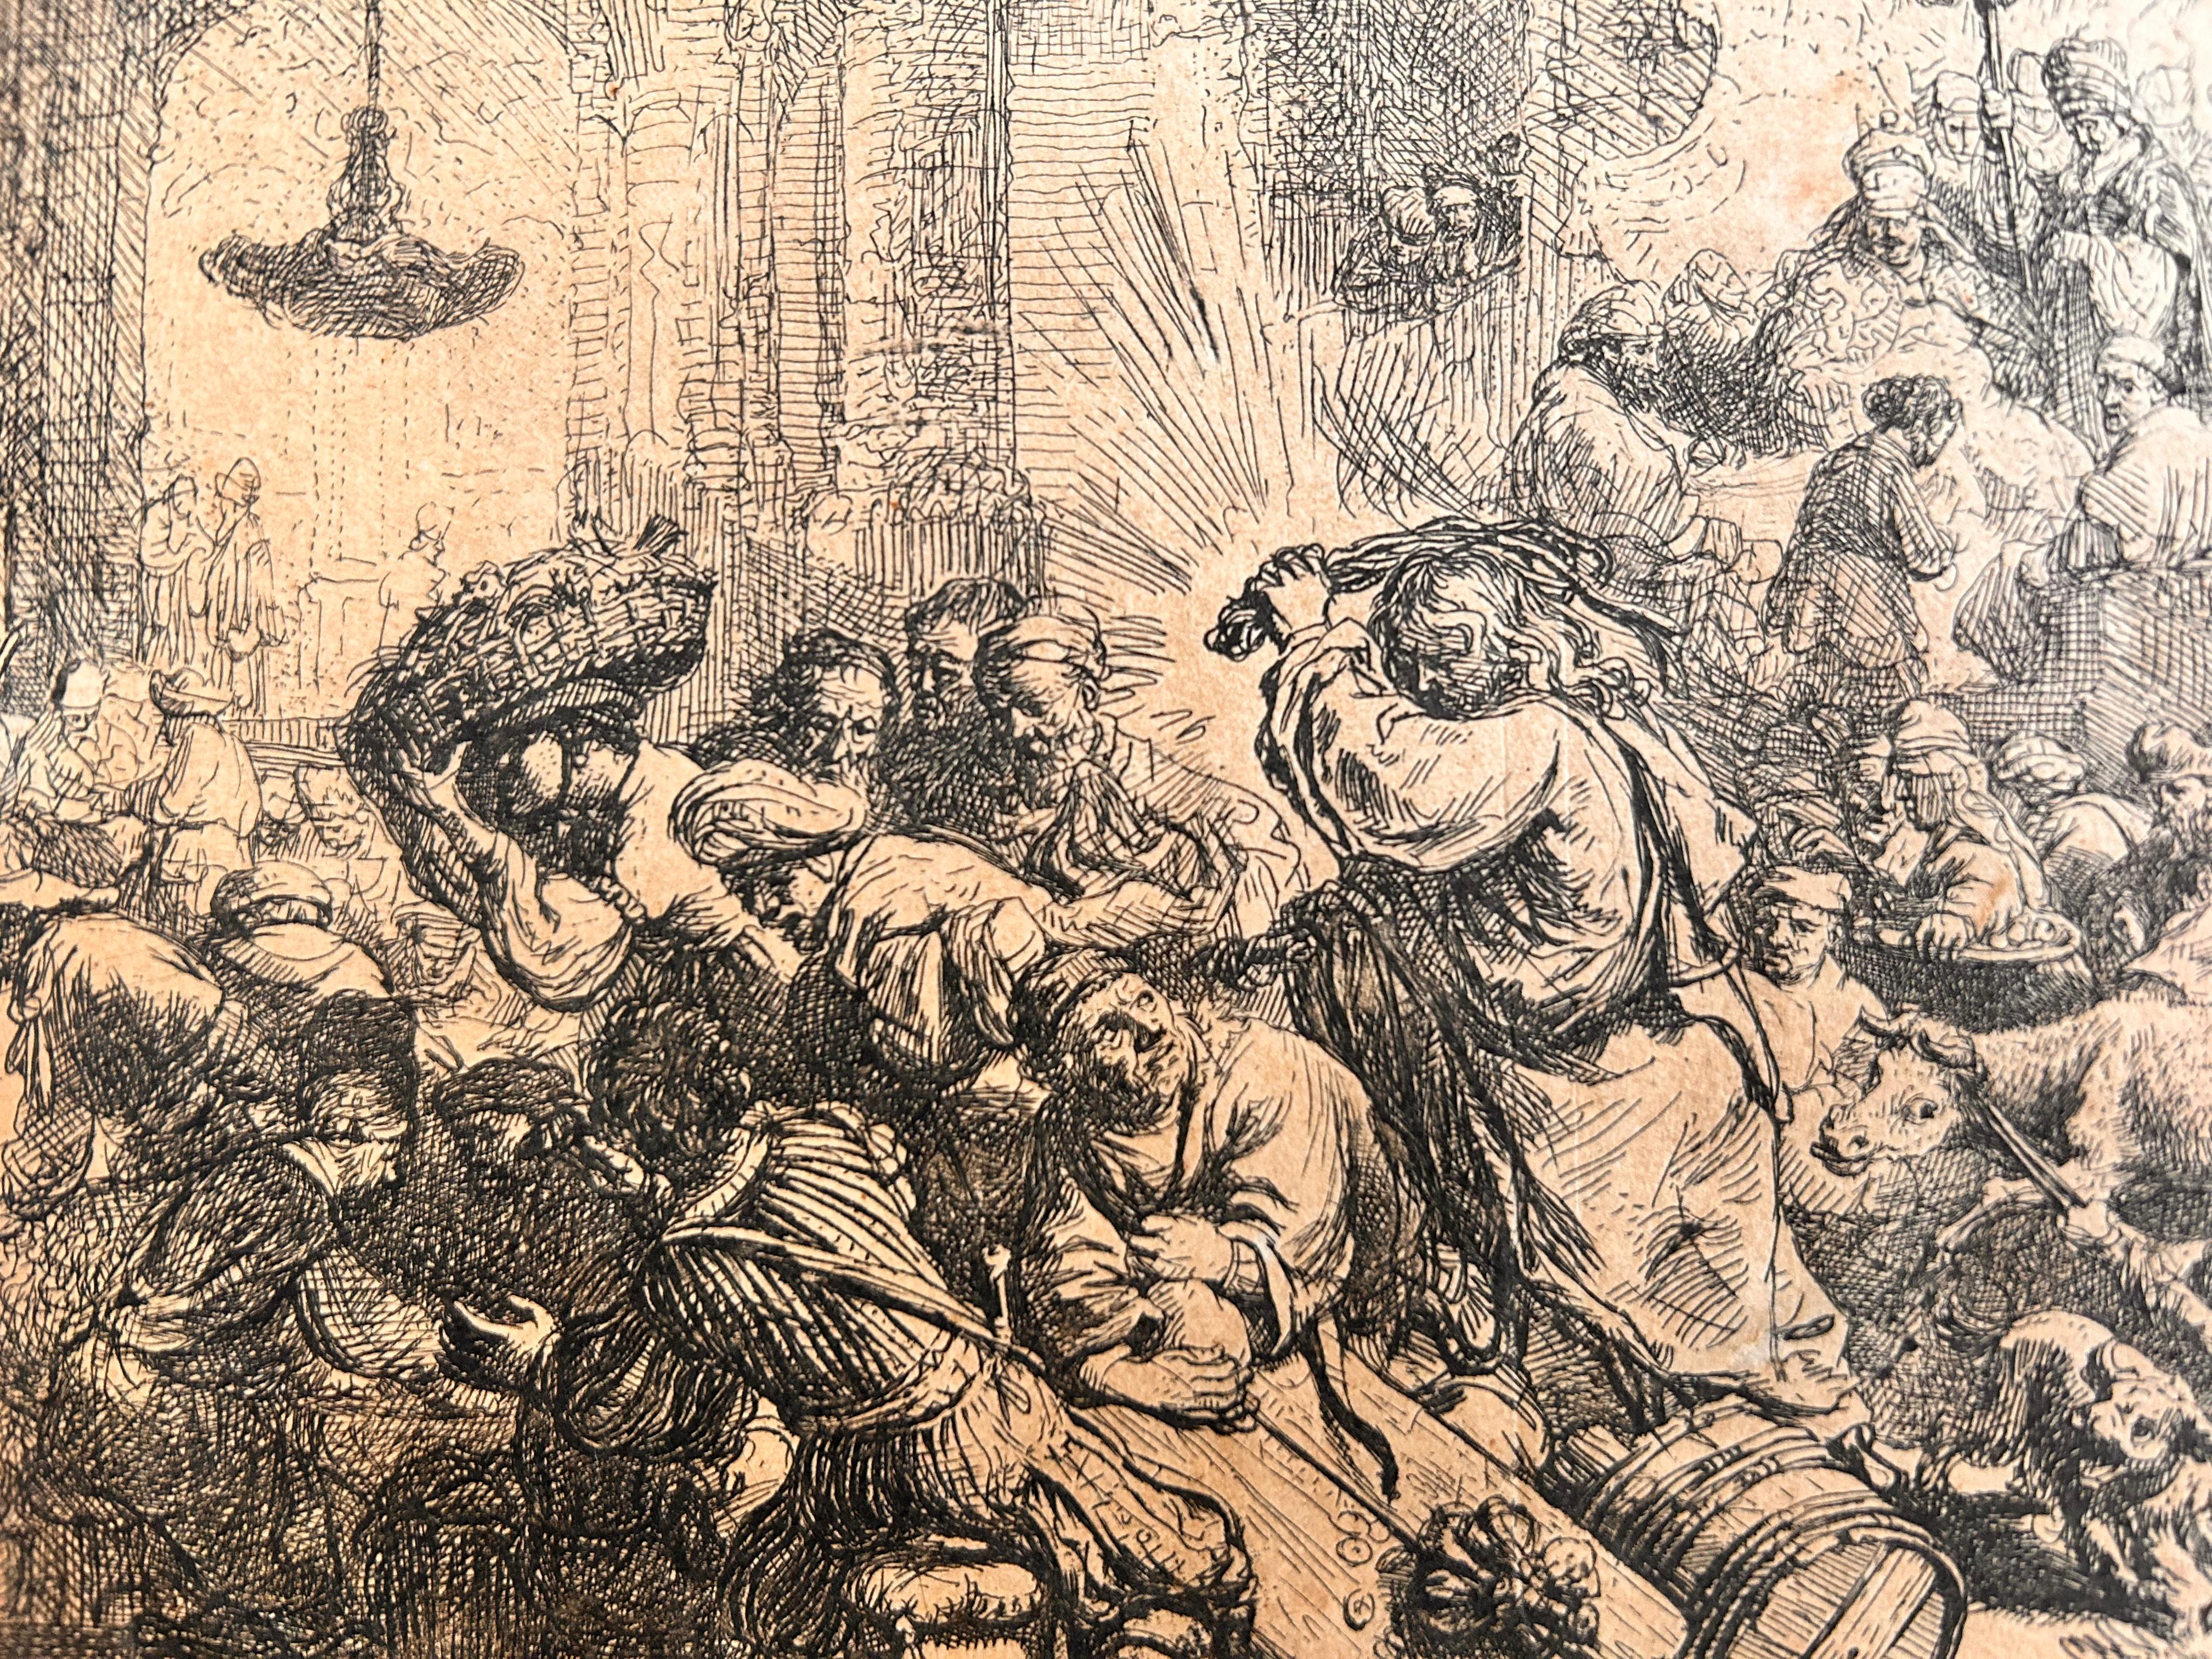 Christ Driving the Money Changers from the Temple by the Dutch Golden Age painter, printmaker, and draughtsman, Rembrandt Harmenszoon van Rijn, usually known as Rembrandt.
This etching with touches of drypoint, 1635, on laid paper is a fine